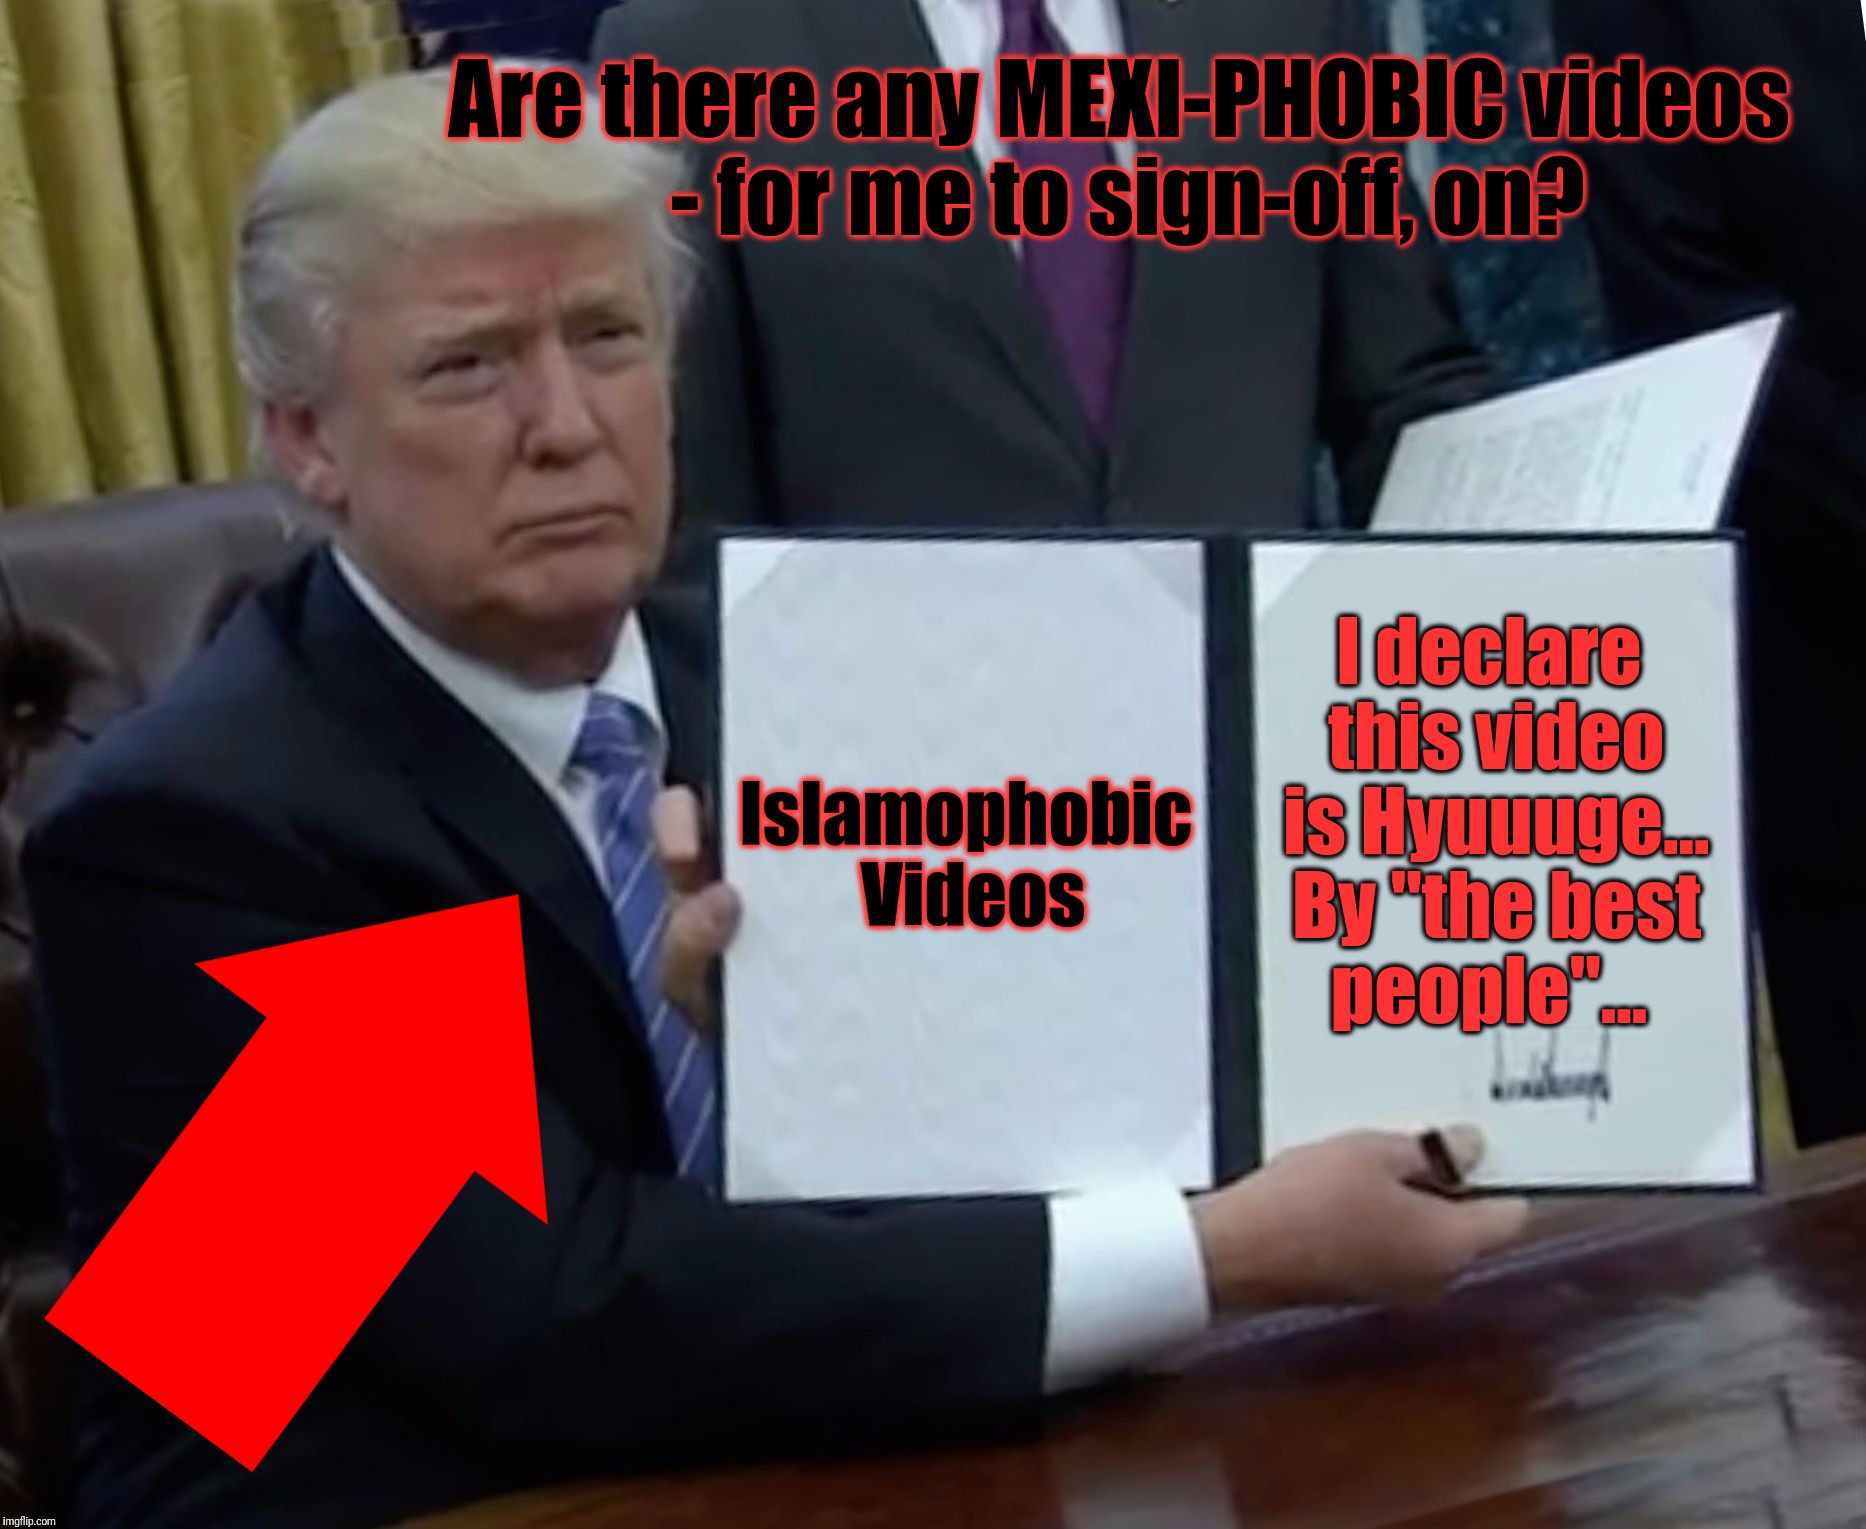 Trump Bill Signing Meme | Islamophobic Videos I declare this video is Hyuuuge... By "the best people"... Are there any MEXI-PHOBIC videos - for me to sign-off, on? | image tagged in memes,trump bill signing | made w/ Imgflip meme maker